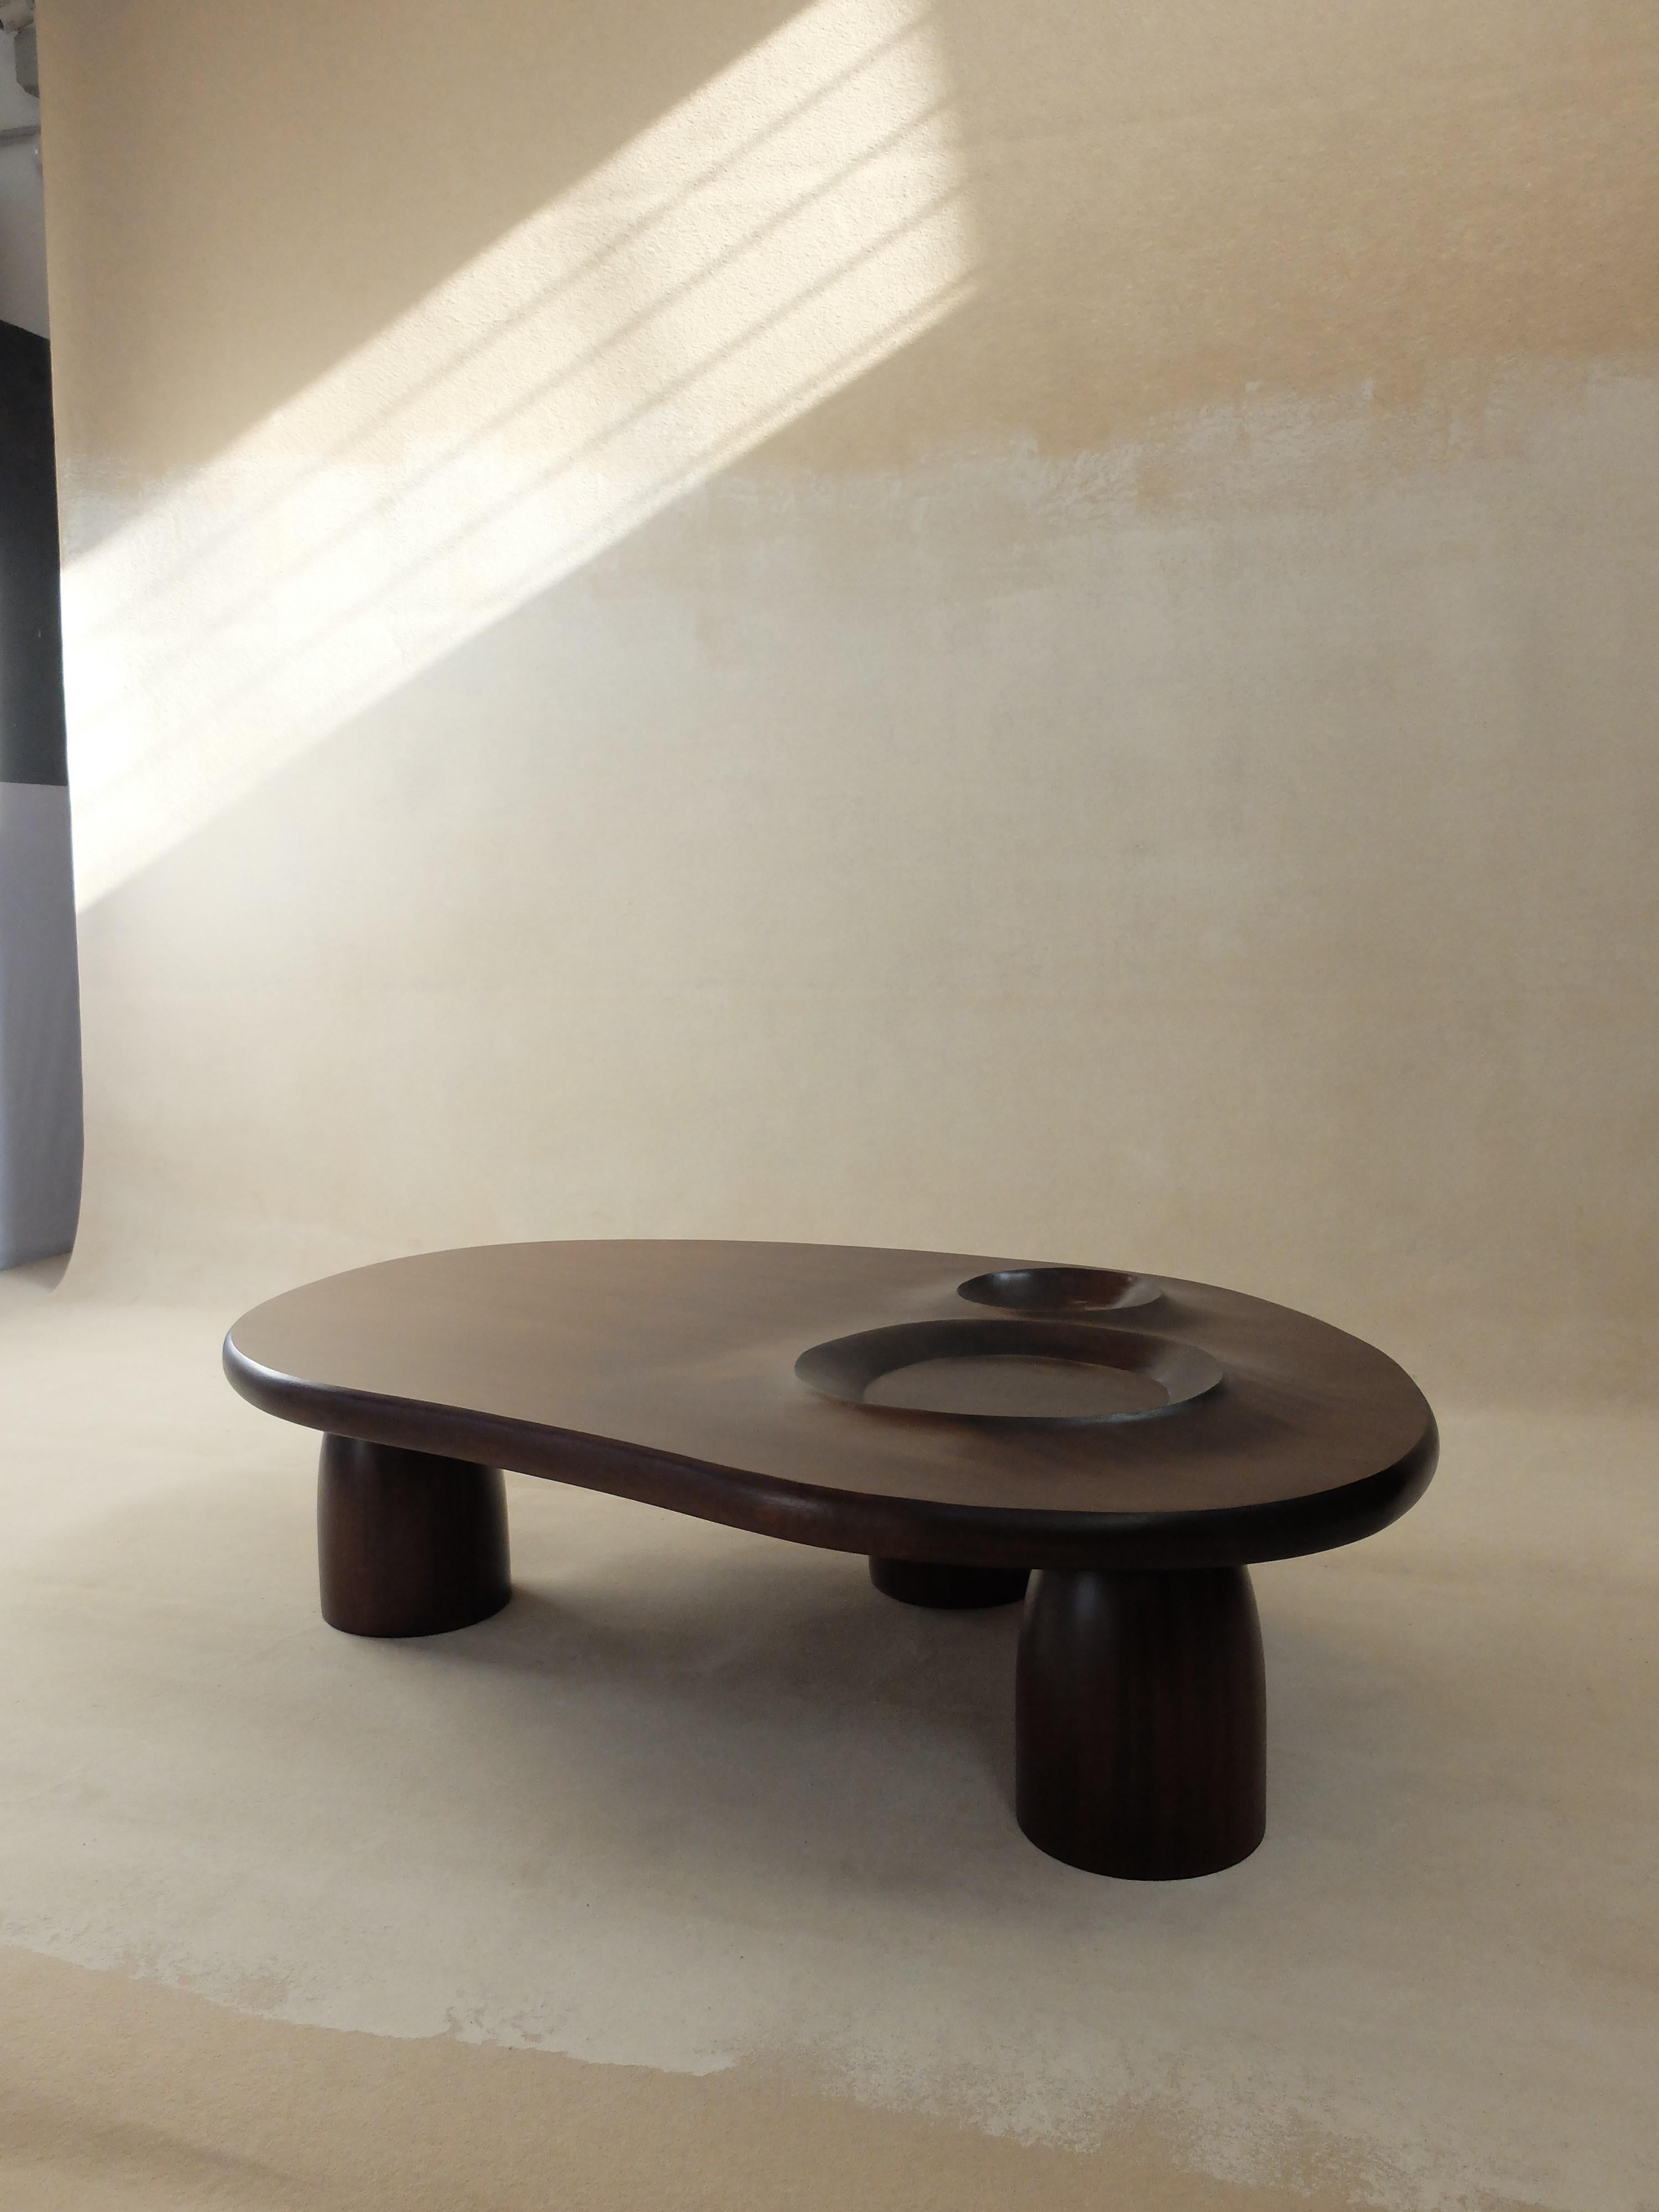 Mer et Cratère Table by Altin
Designed and developed by Yasmine Sfar and Mehdi Kebaier.
Dimensions: D 130 x W 90 x H 35 cm
Materials: Wood.

Hand-carved wooden table.

Orbit
A journey to a new dream world that we could call «home».
Original